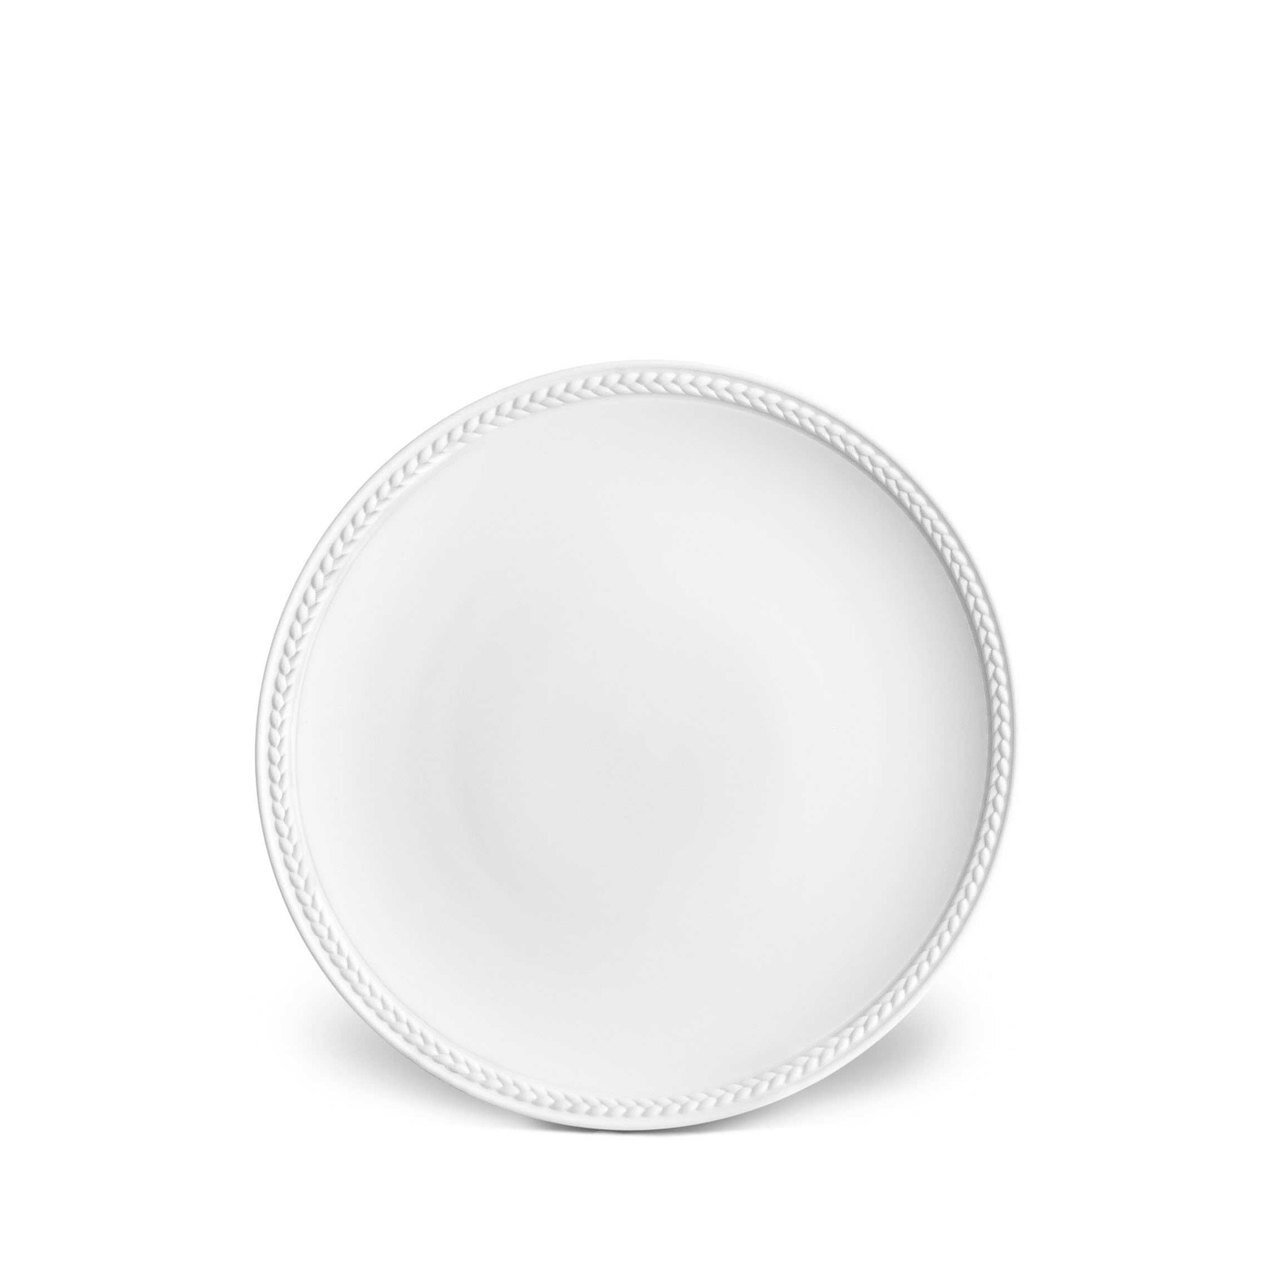 L'Objet Soie Tressee Bread and Butter Plate White